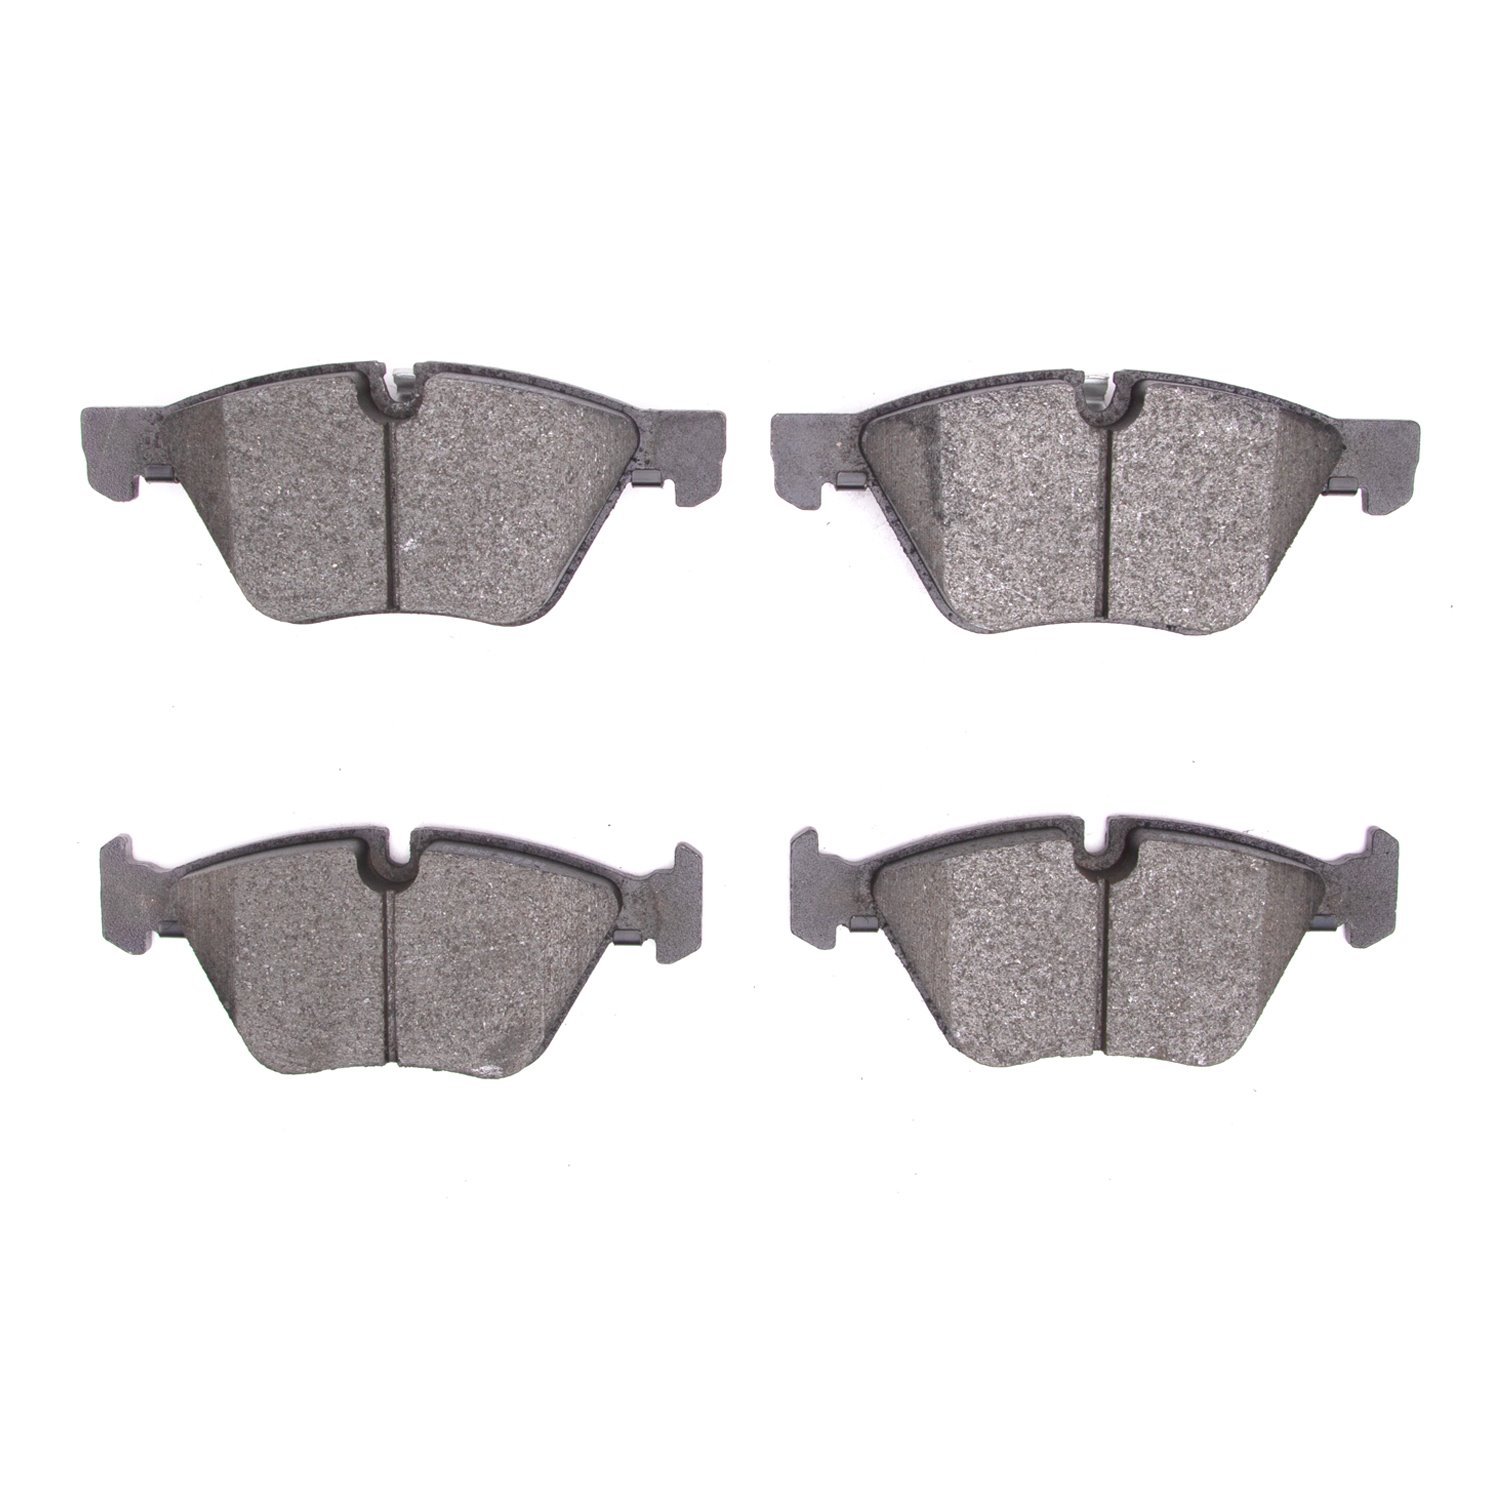 1600-1061-00 5000 Euro Ceramic Brake Pads, Fits Select BMW, Position: Front